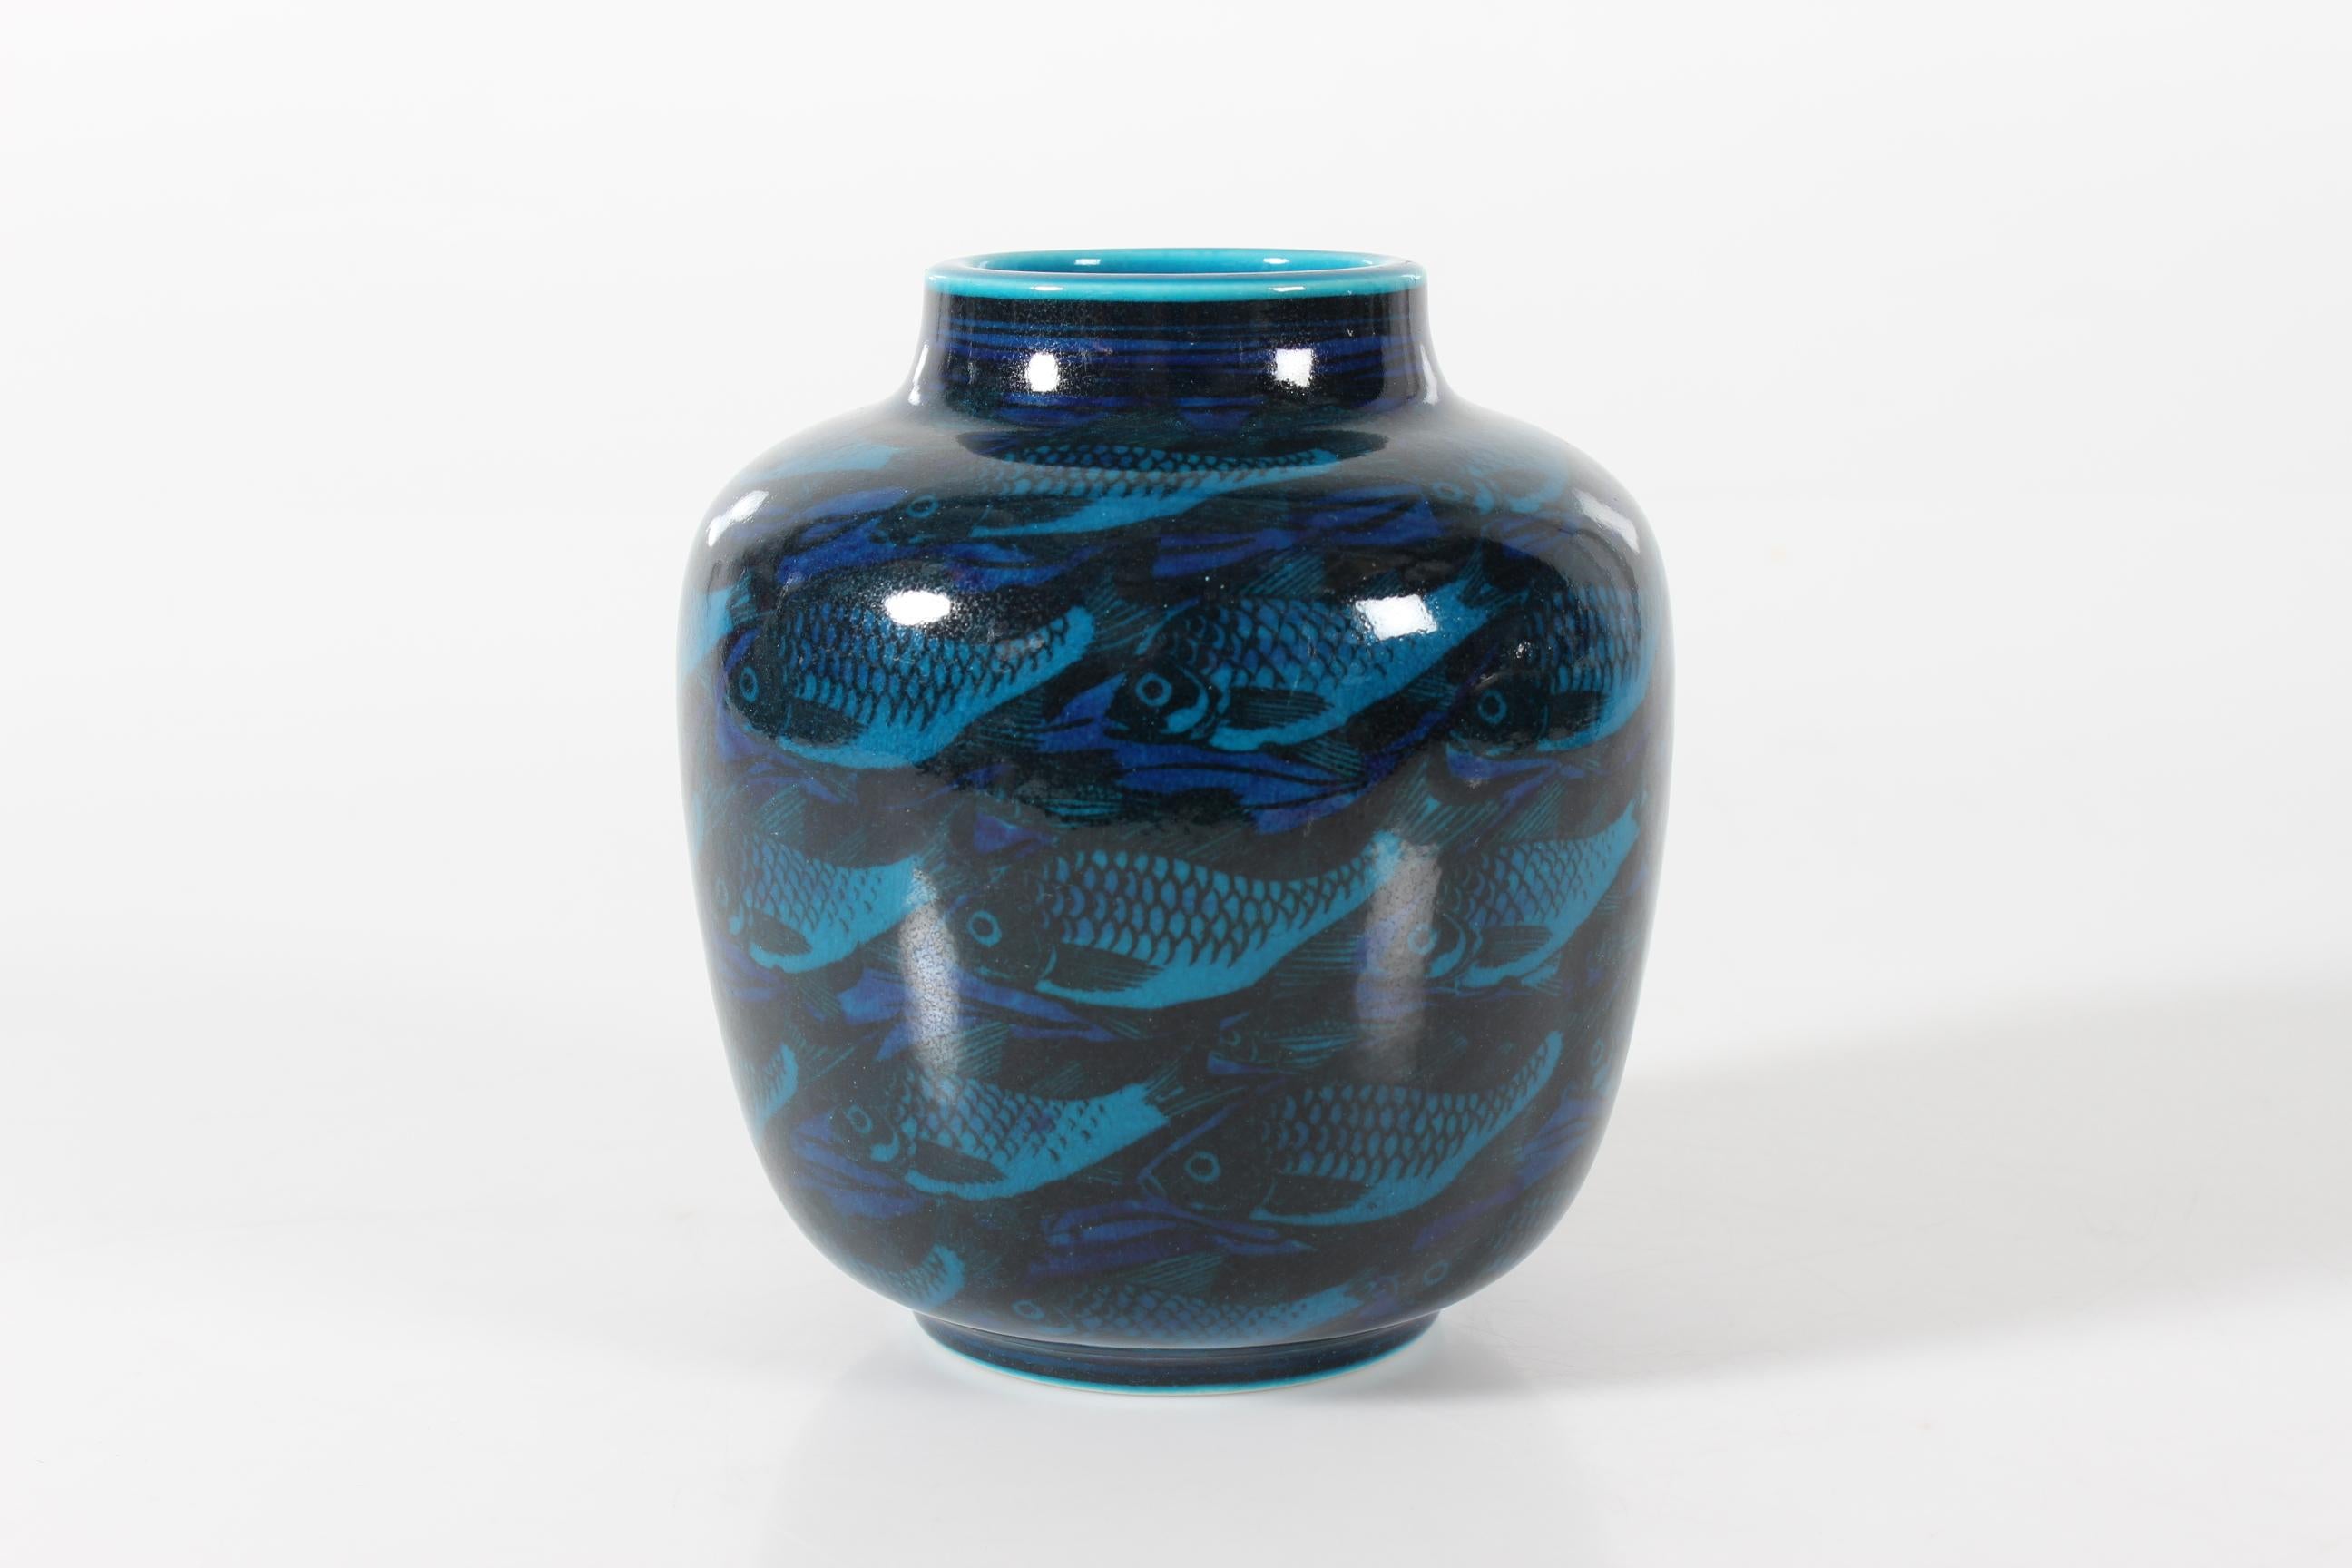 Blue bojan sharped jar vase model 21299 decorated with
turquoise blue, black and cobalt glossy glaze with fish motifs.

Fully marked on bottom with the Royal Copenhagen backstamp including the 3 waves and the initials of Nils Thorsson.
According to